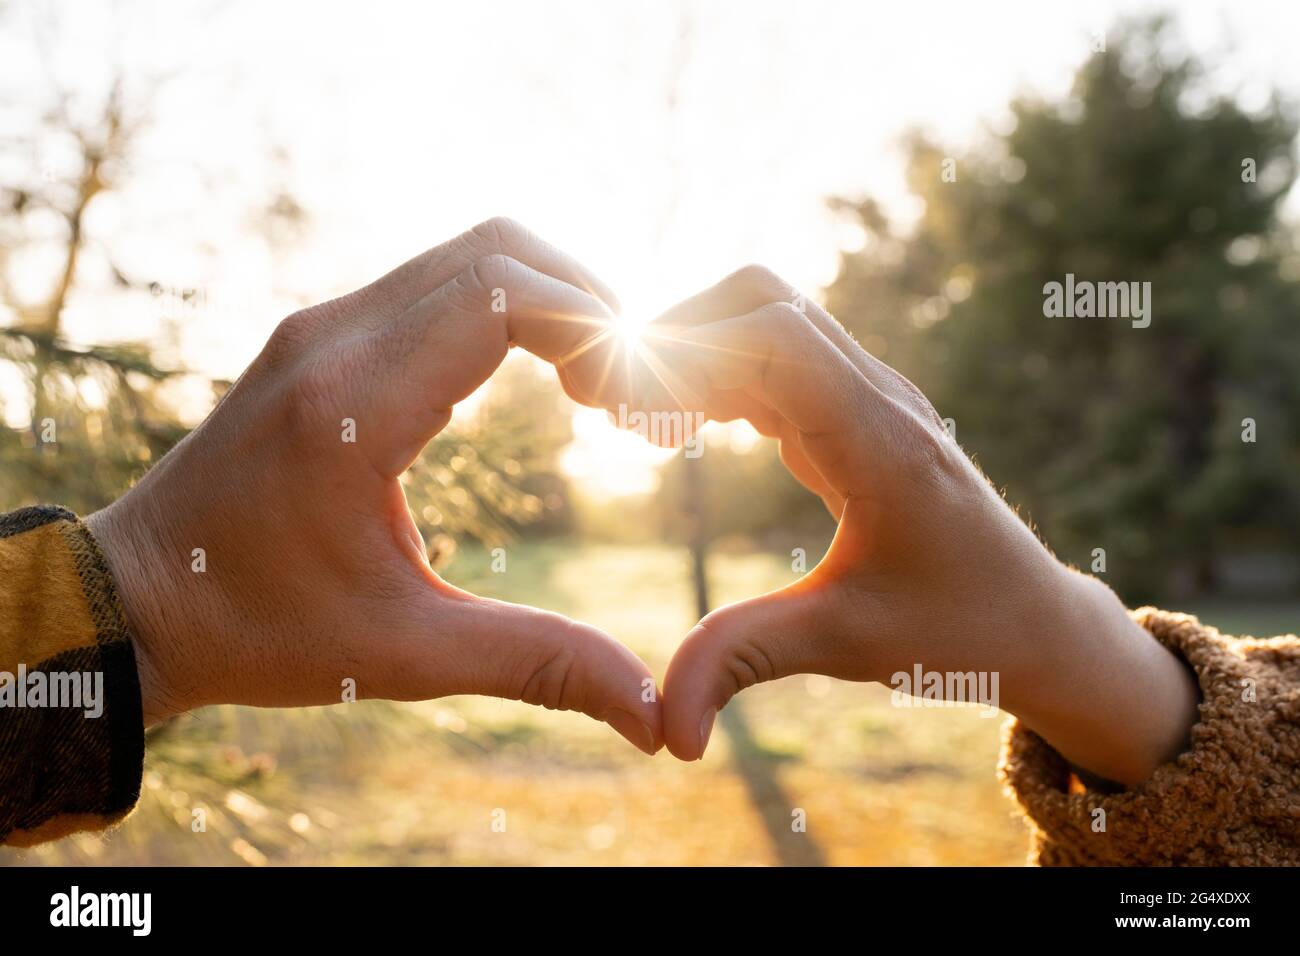 Man and woman's hands making heart shape symbol during sunset Stock Photo